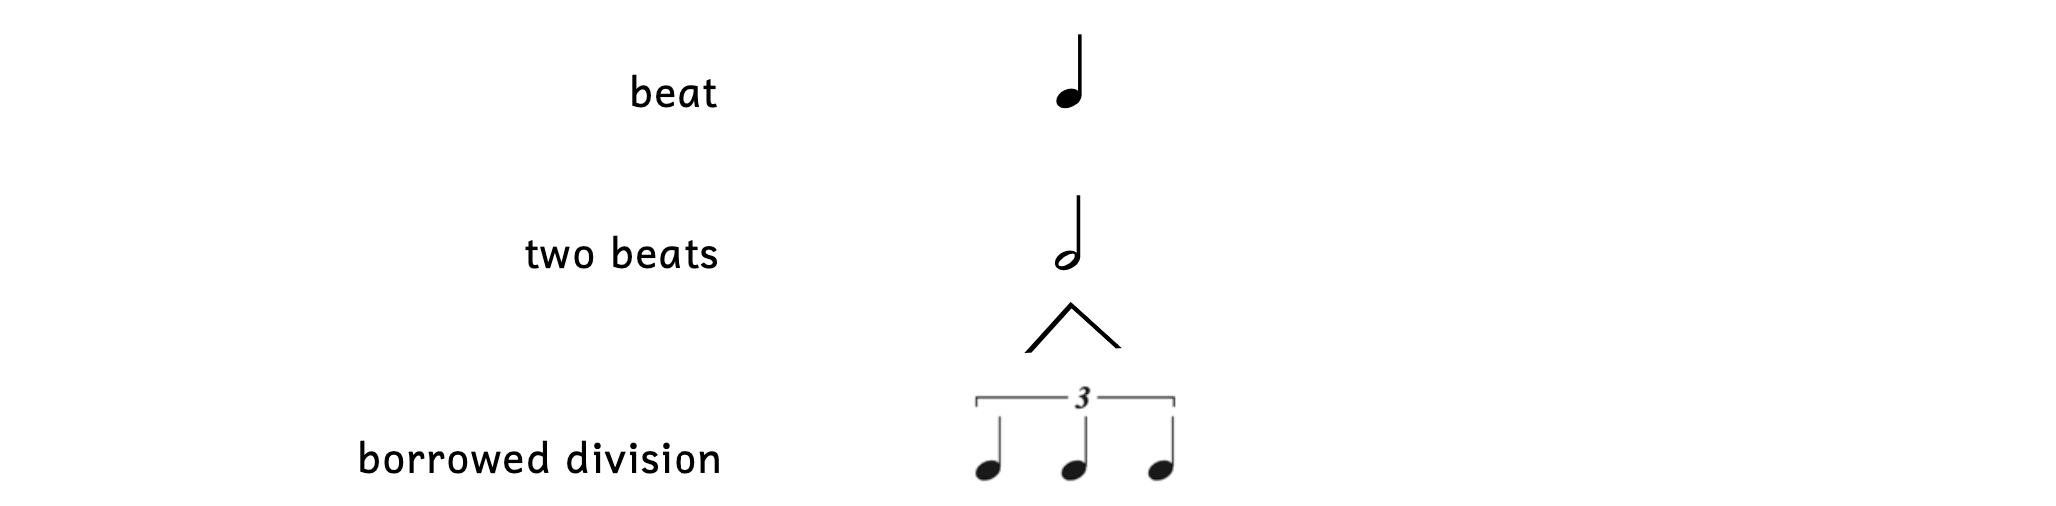 Triplets of longer values. A quarter note equals one beat, so a half note equals two beats. Two beats are equally divided into quarter-note triplets.